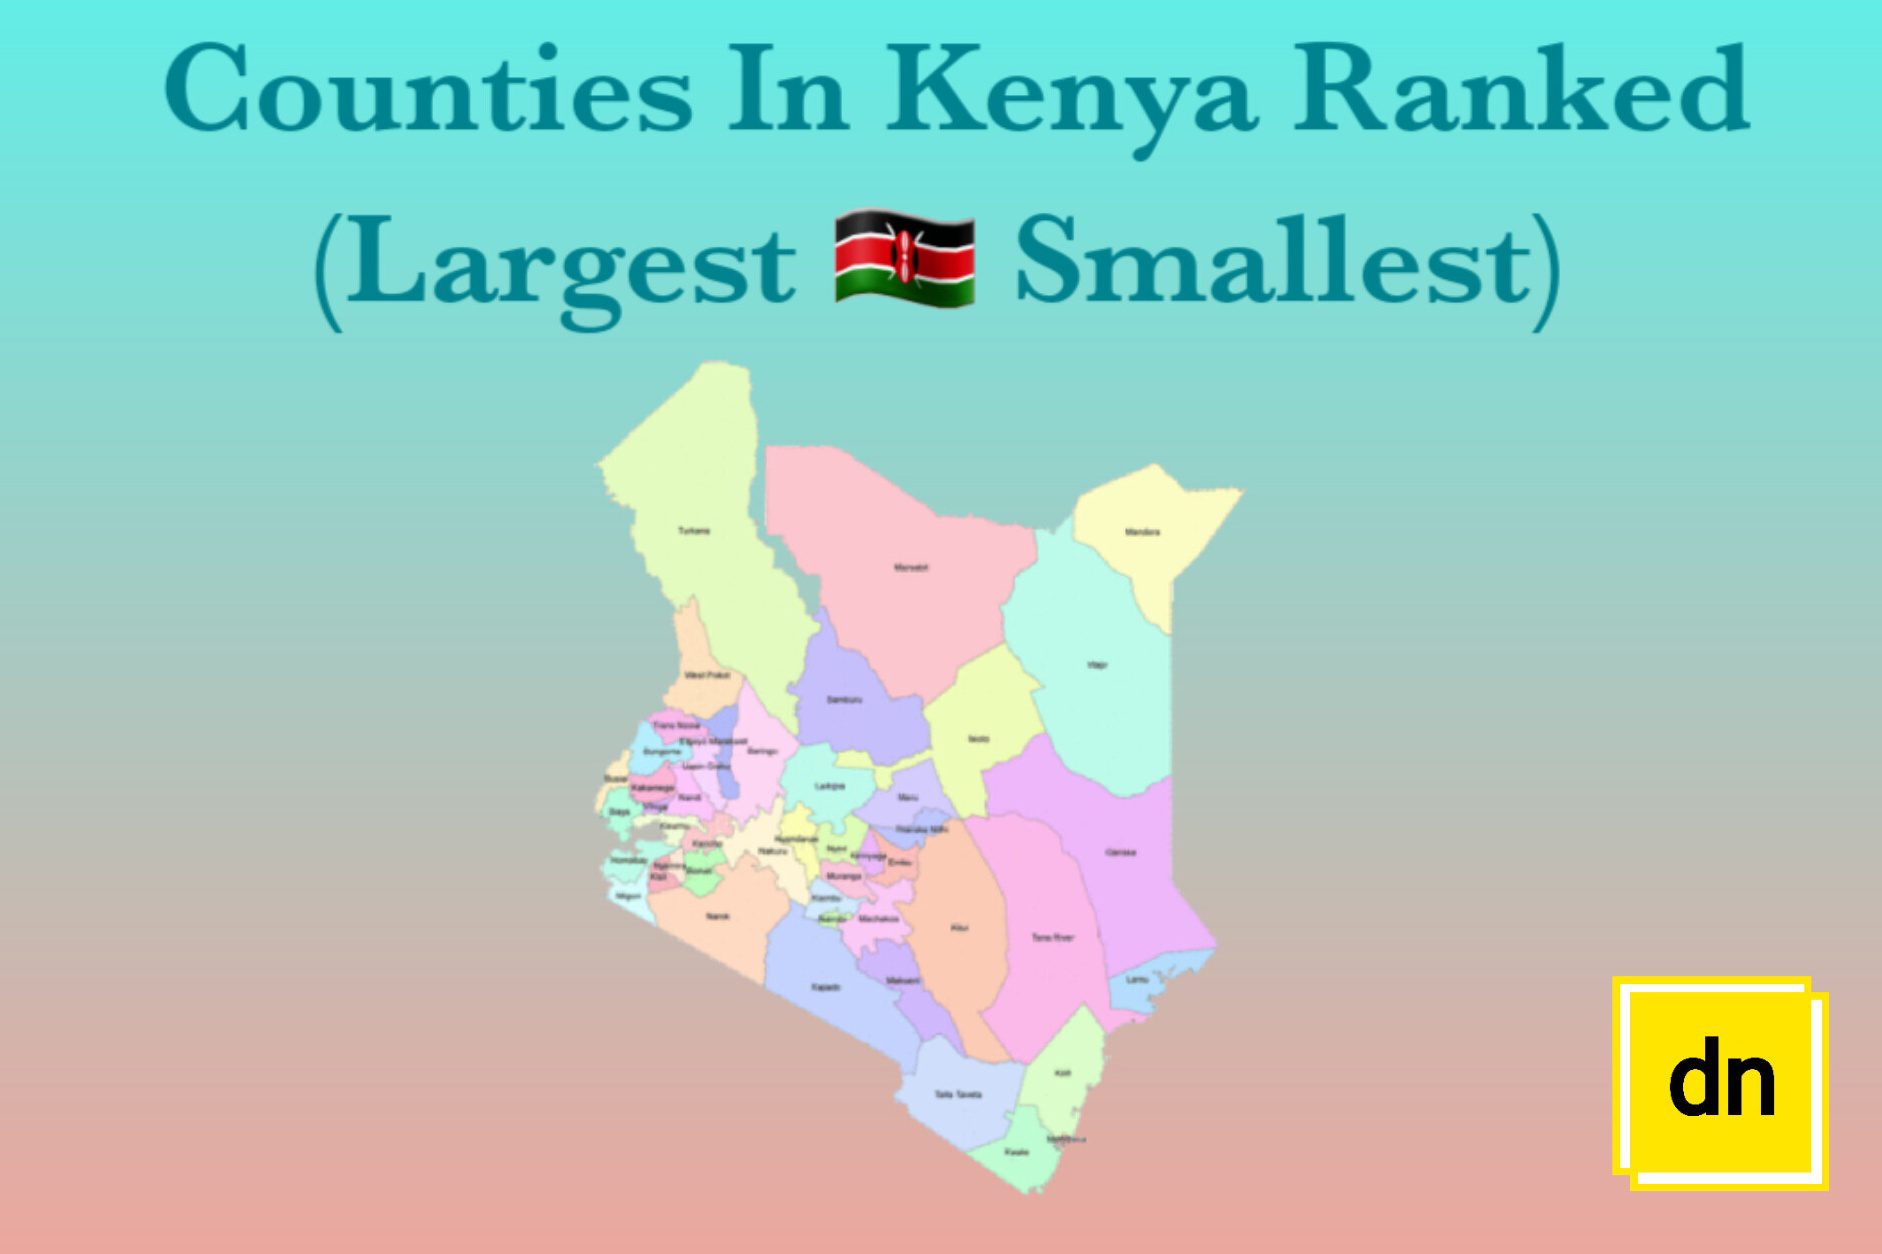 Counties in Kenya from largest to smallest